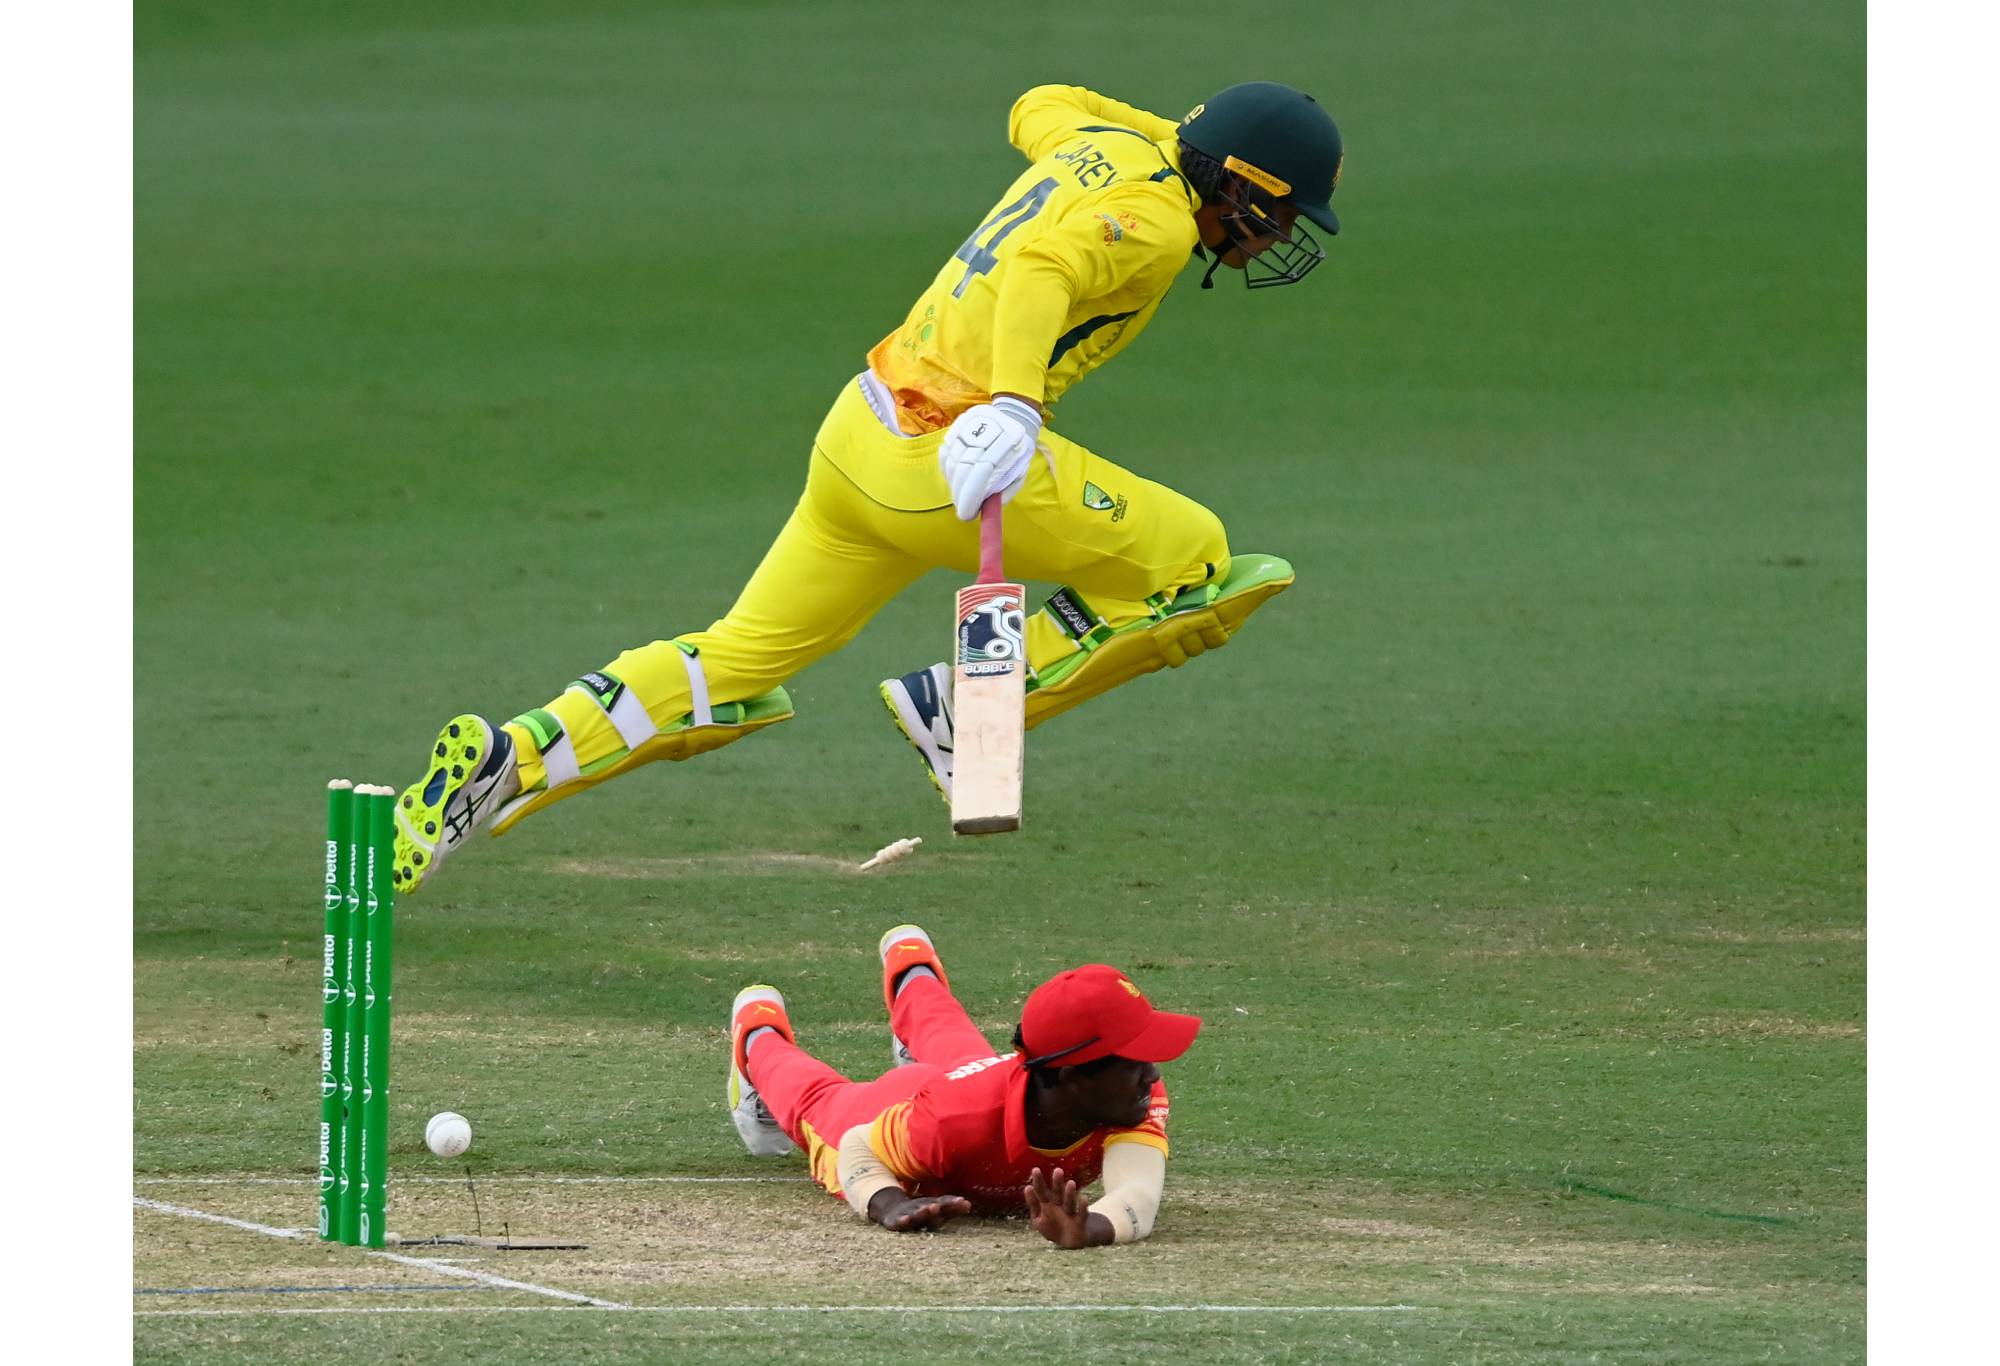 TOWNSVILLE, AUSTRALIA - AUGUST 31: Alex Carey of Australia jumps over Wessly Madhevere of Zimbabwe as he attempts a run out during game two of the One Day International series between Australia and Zimbabwe at Riverway Stadium on August 31, 2022 in Townsville, Australia. (Photo by Ian Hitchcock/Getty Images)